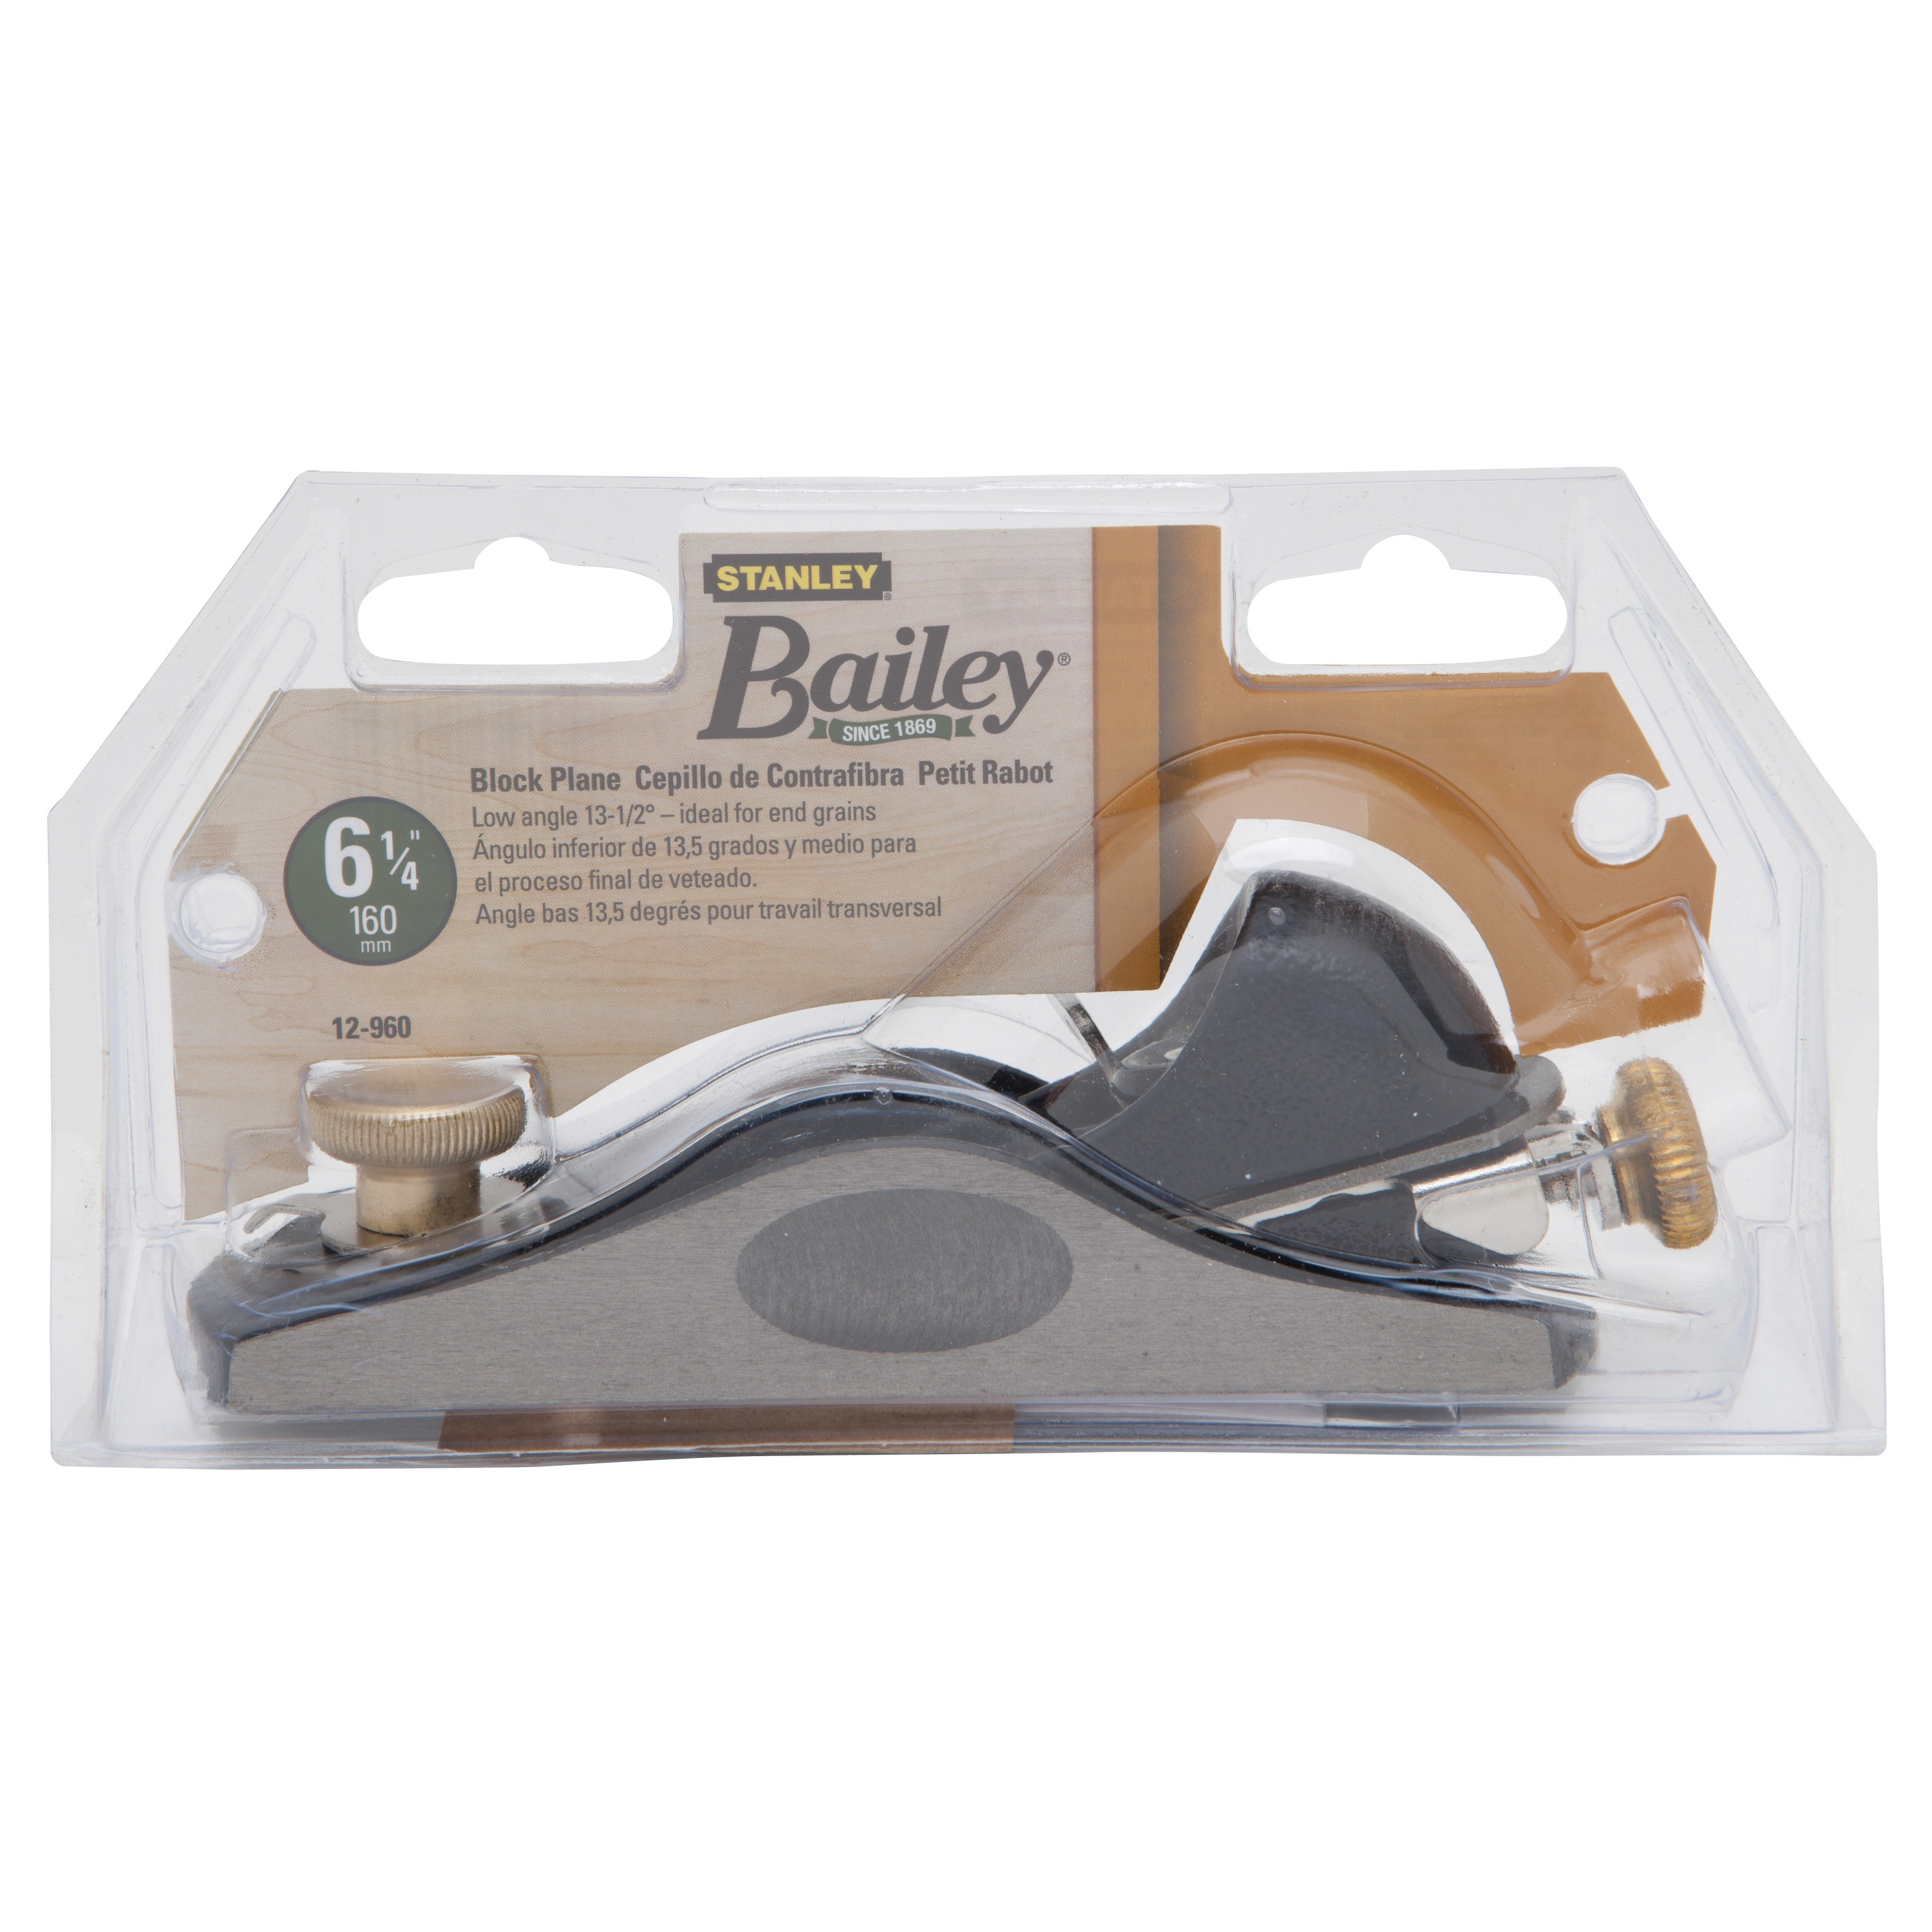 Stanley Tools - 614 in Bailey Low Angle Block Plane - 12-960